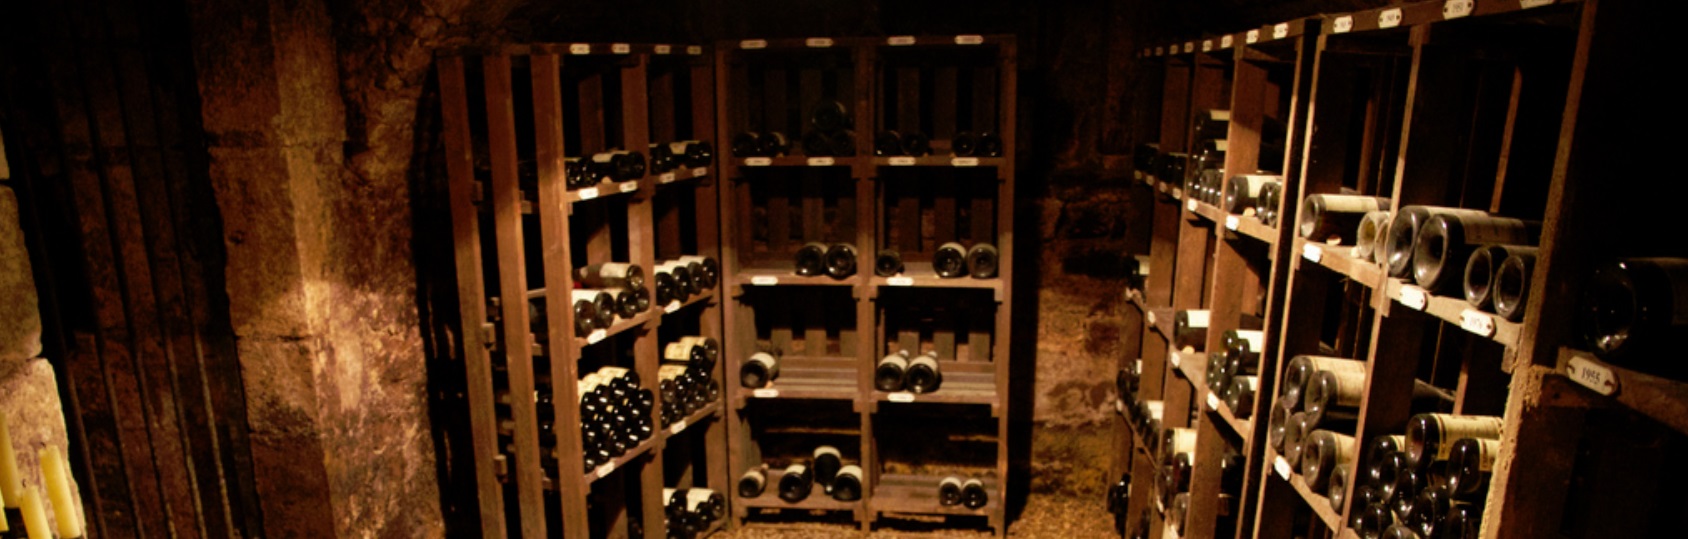 Recommendations for Wine Racks – Part 3